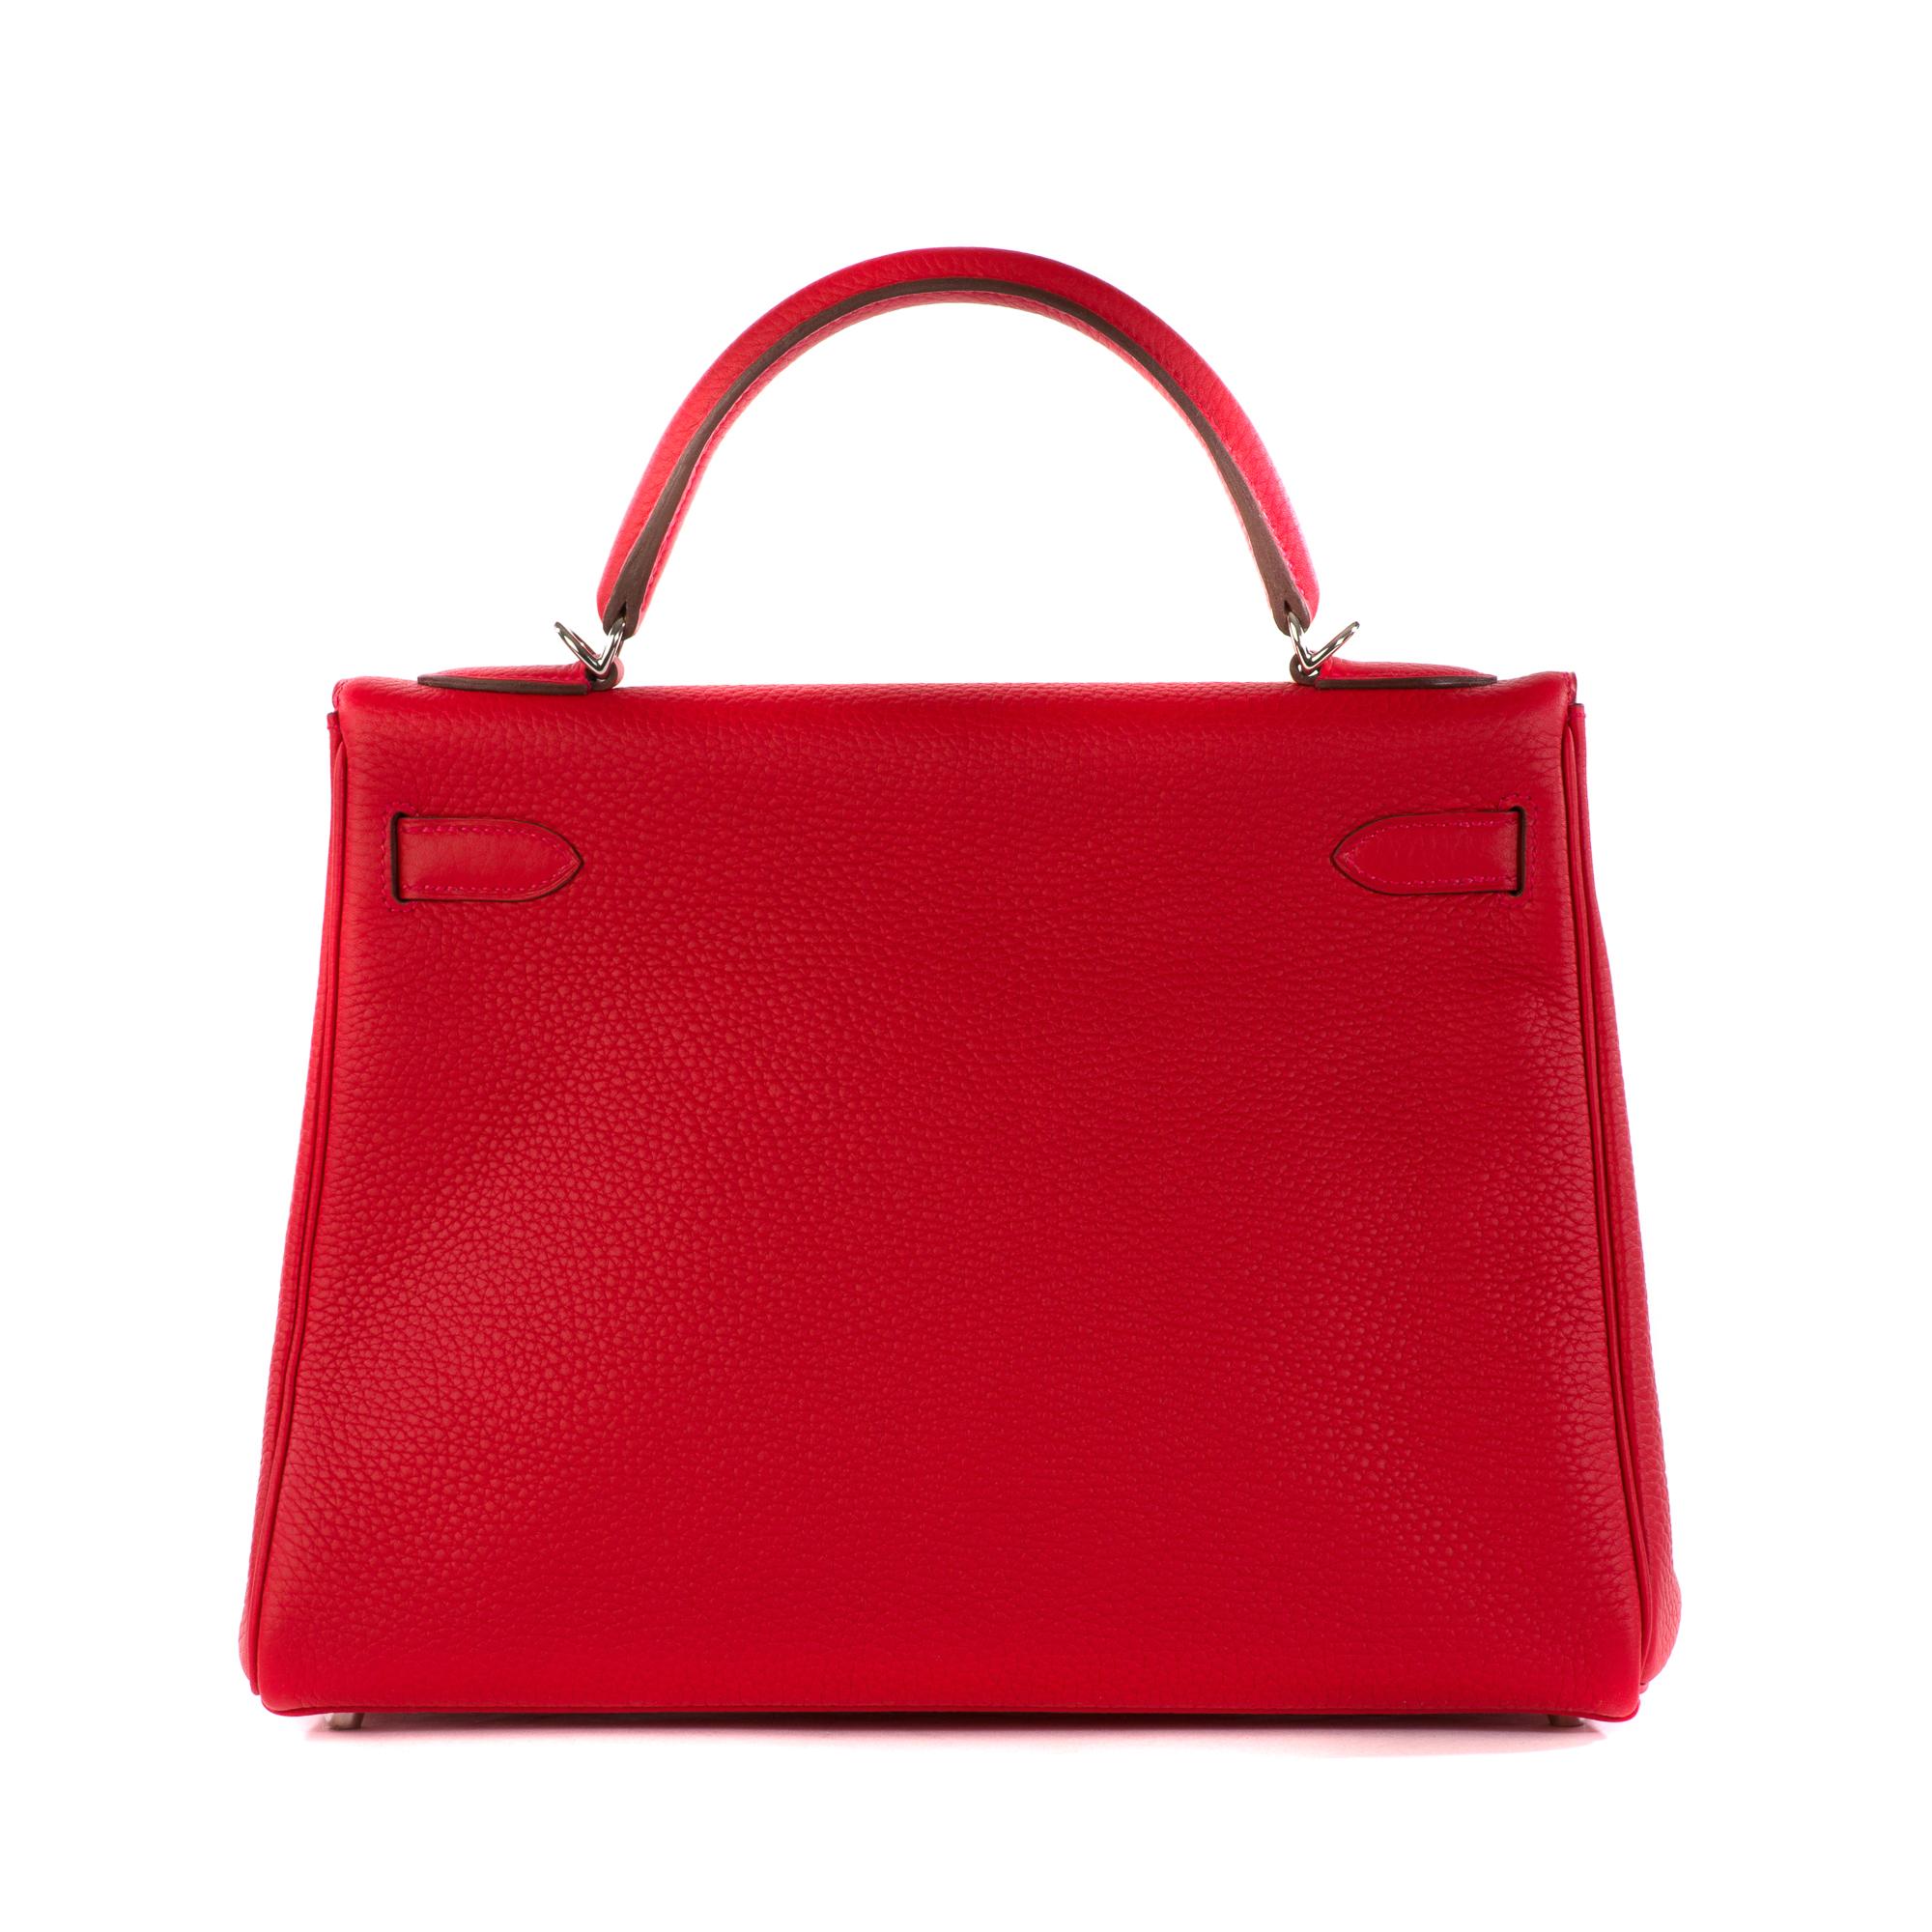 This iconic and classic tote is crafted of beautifully textured Togo leather in red Rouge casaque. The bag features a sturdy rolled leather top handle with palladium silver links, an optional shoulder strap with silver clasps, and a crossover flap